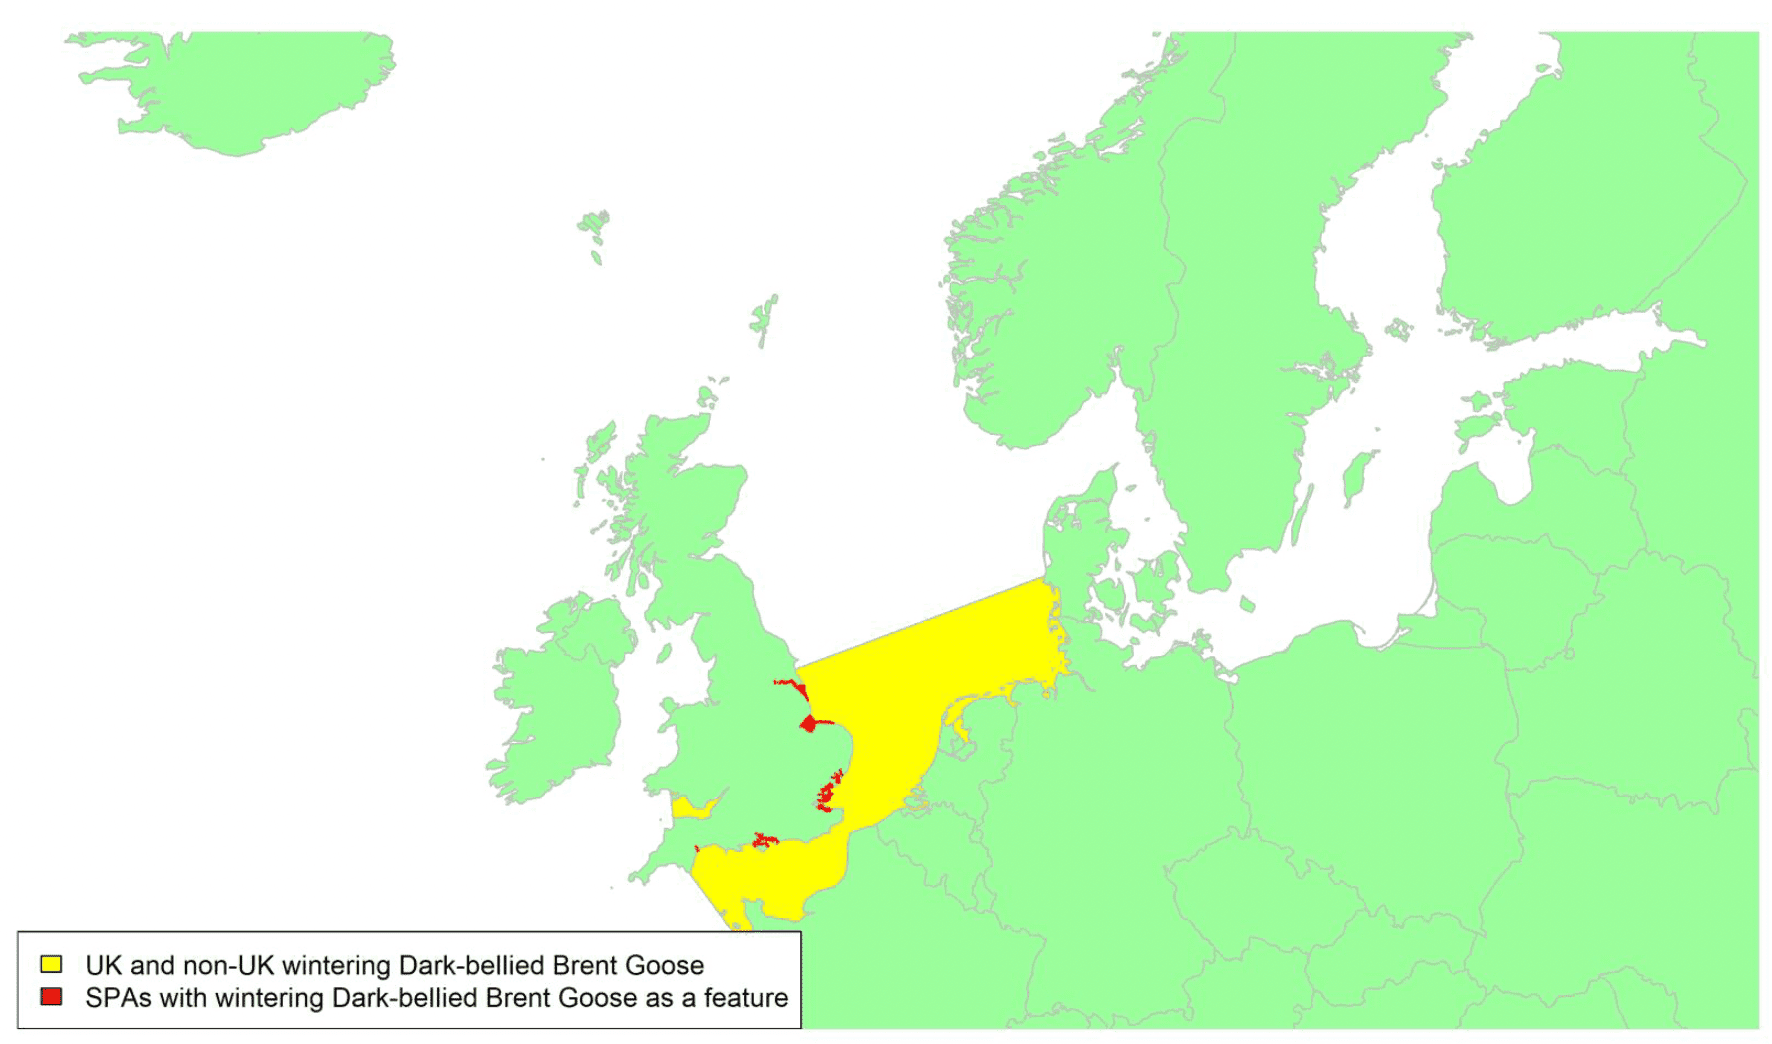 Map of North West Europe showing migratory routes and SPAs within the UK for Dark-bellied Brent Geese as described in the text below.